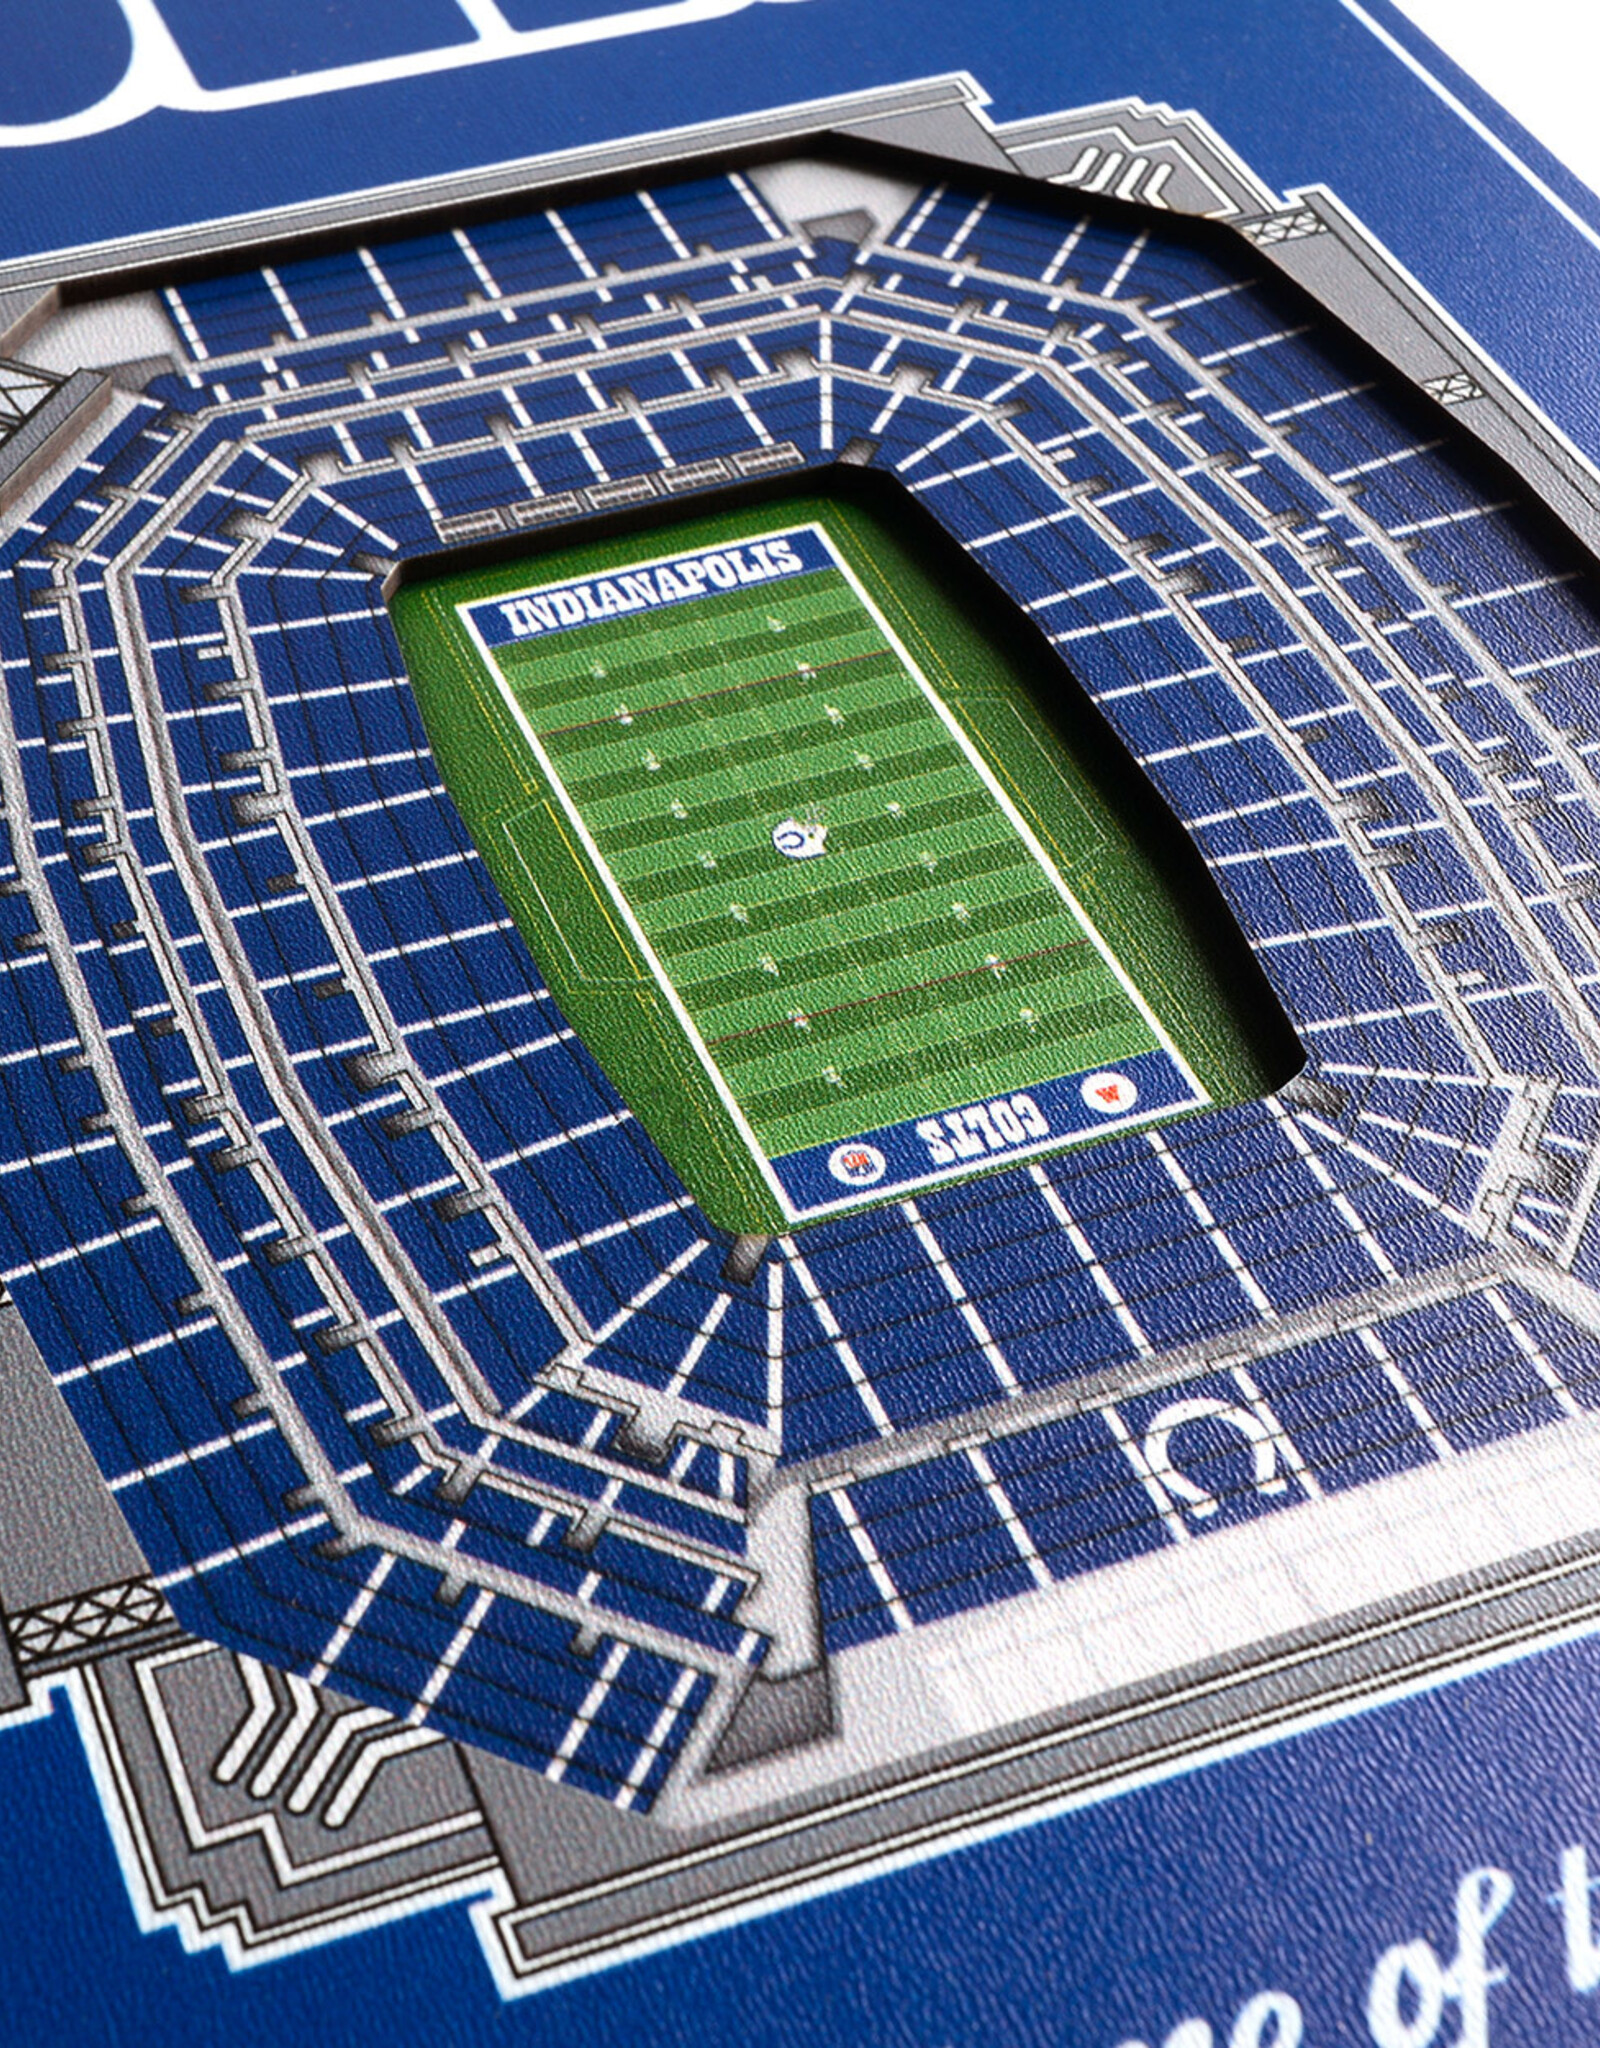 YOU THE FAN Indianapolis Colts 3D StadiumView 8x32 Banner